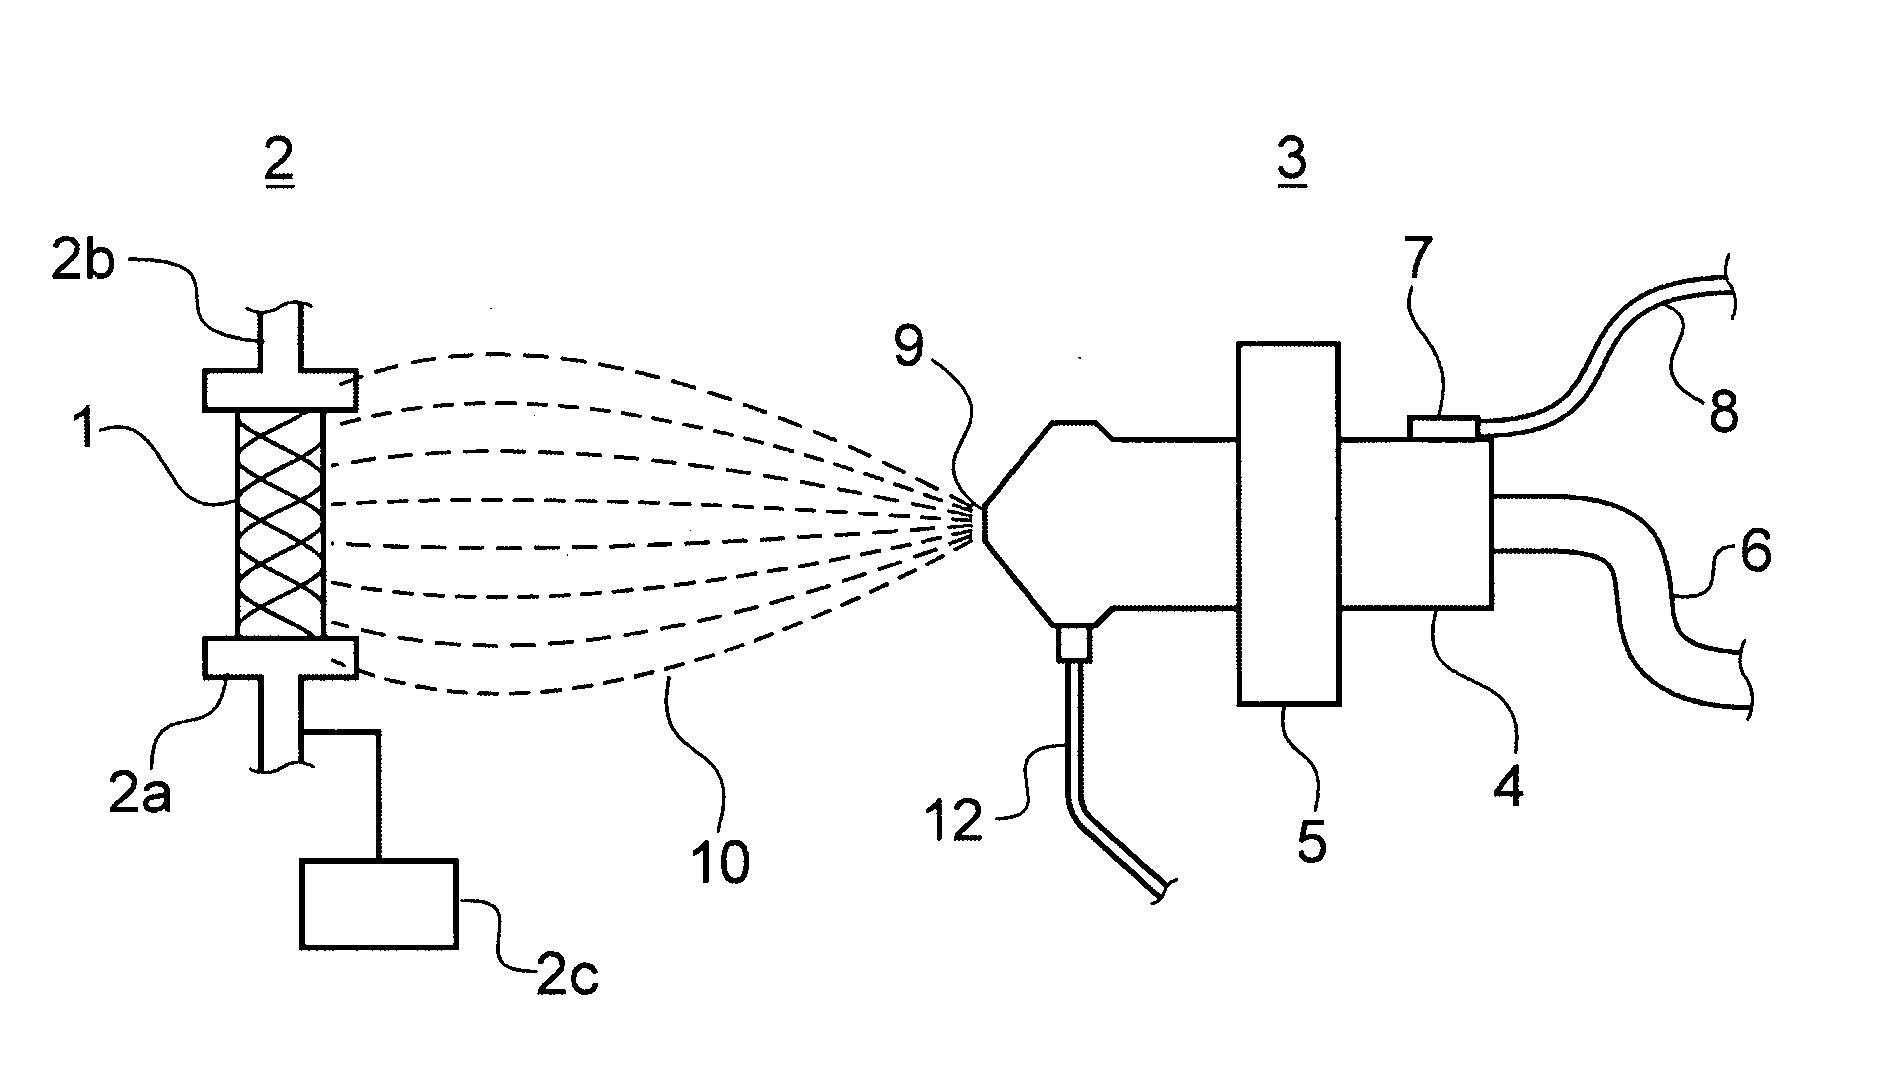 Apparatus and method for electrostatic spray coating of medical devices